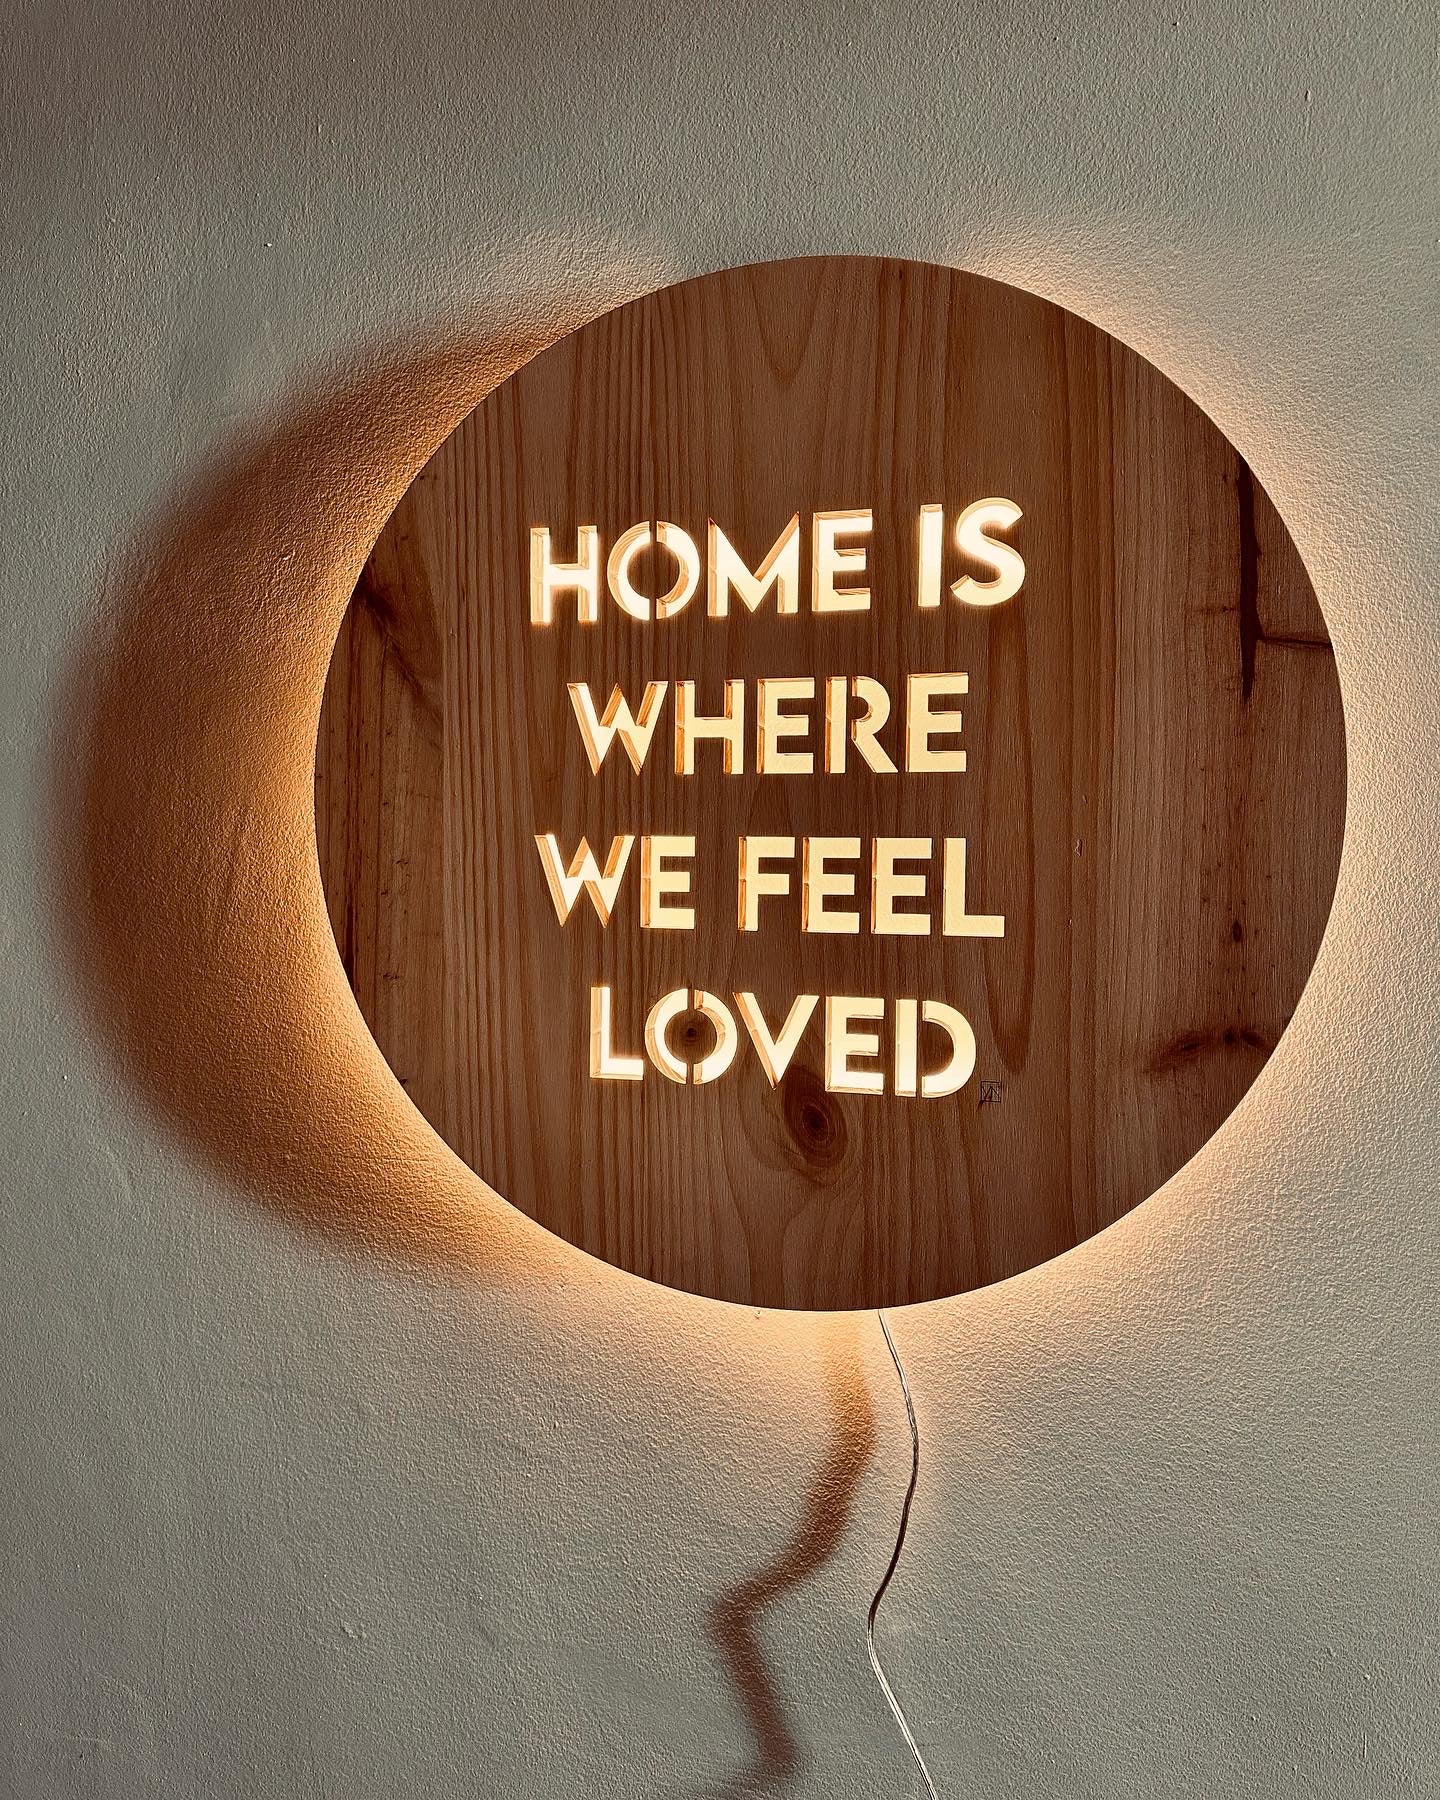 Home is where we feel loved